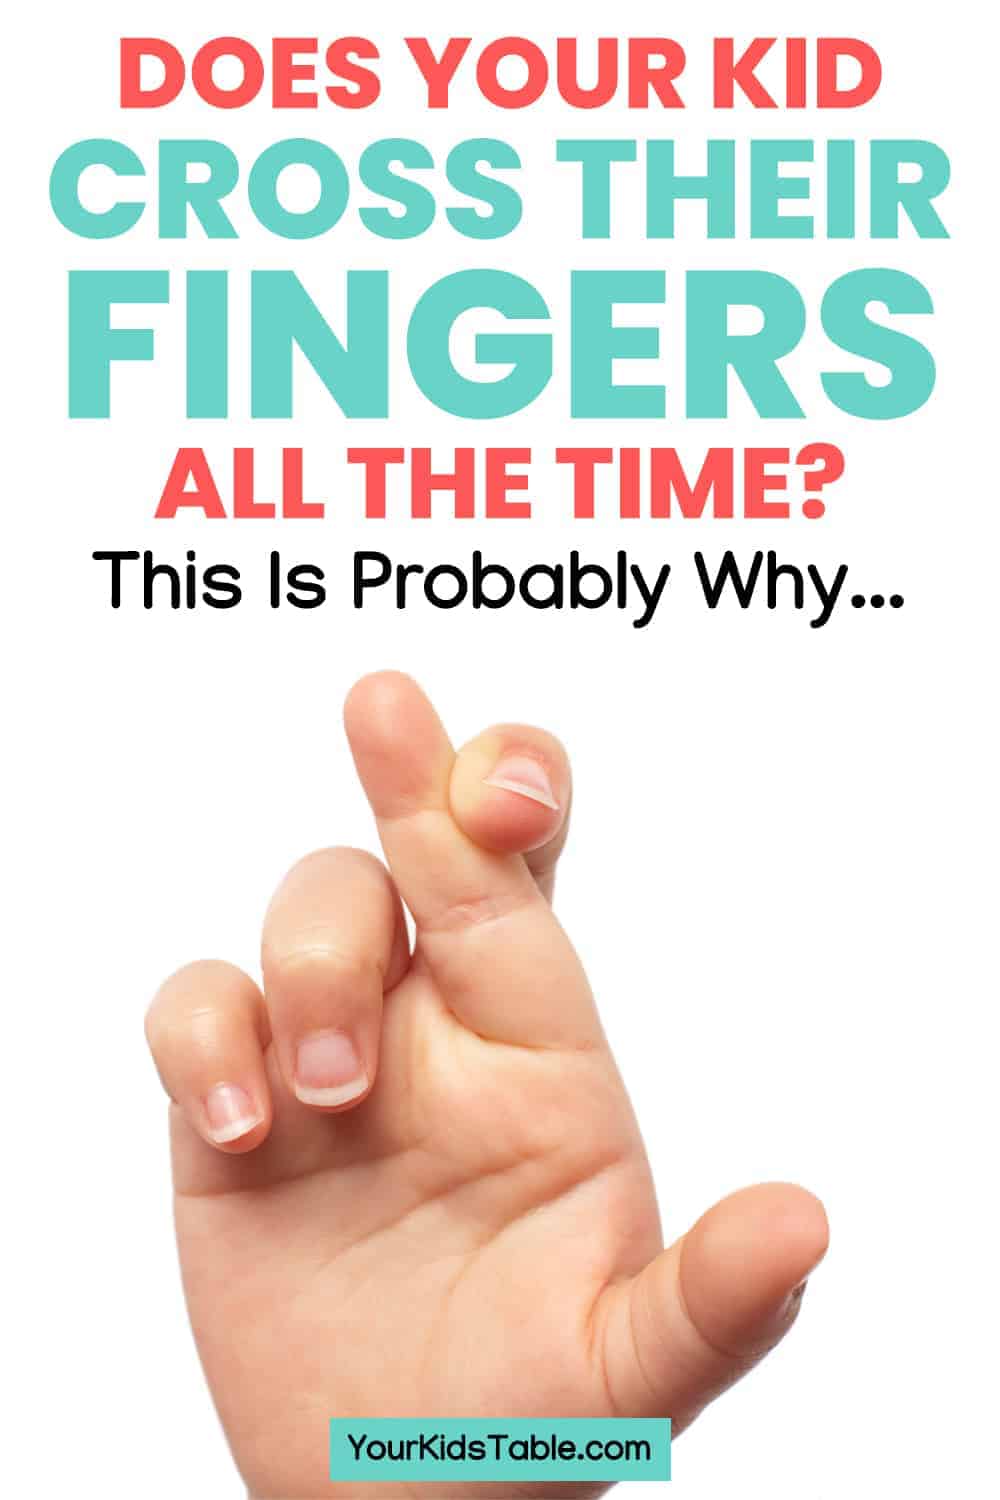 Do you have a toddler crossing their fingers? Worried it's a sign of autism? Find out the hidden reason why your child is always crossing their fingers...